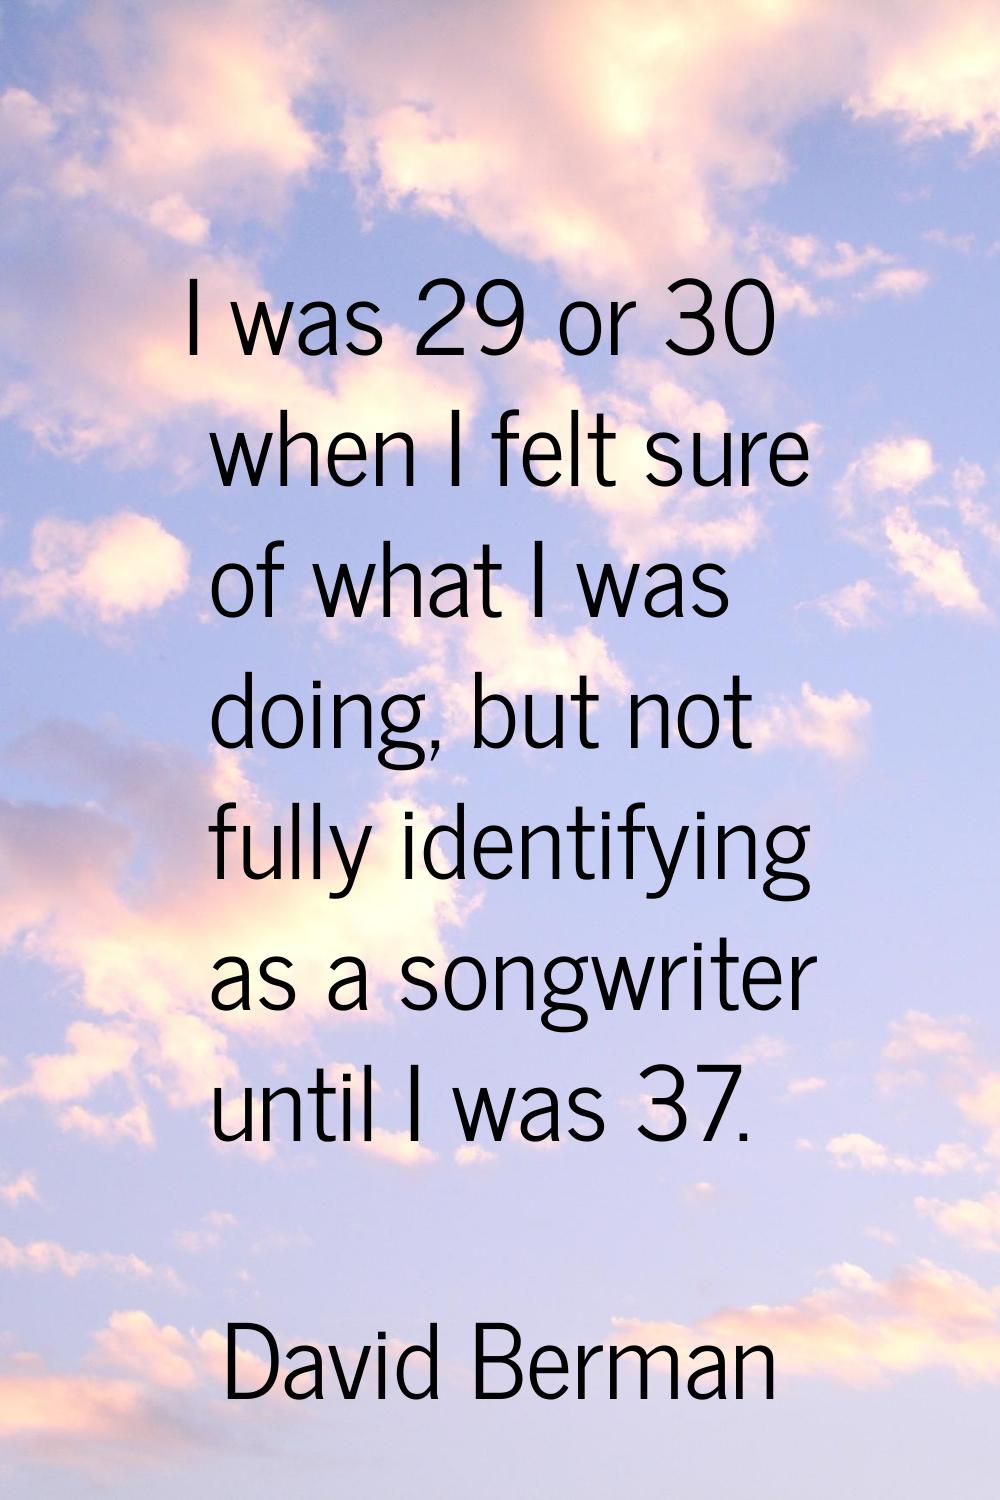 I was 29 or 30 when I felt sure of what I was doing, but not fully identifying as a songwriter unti